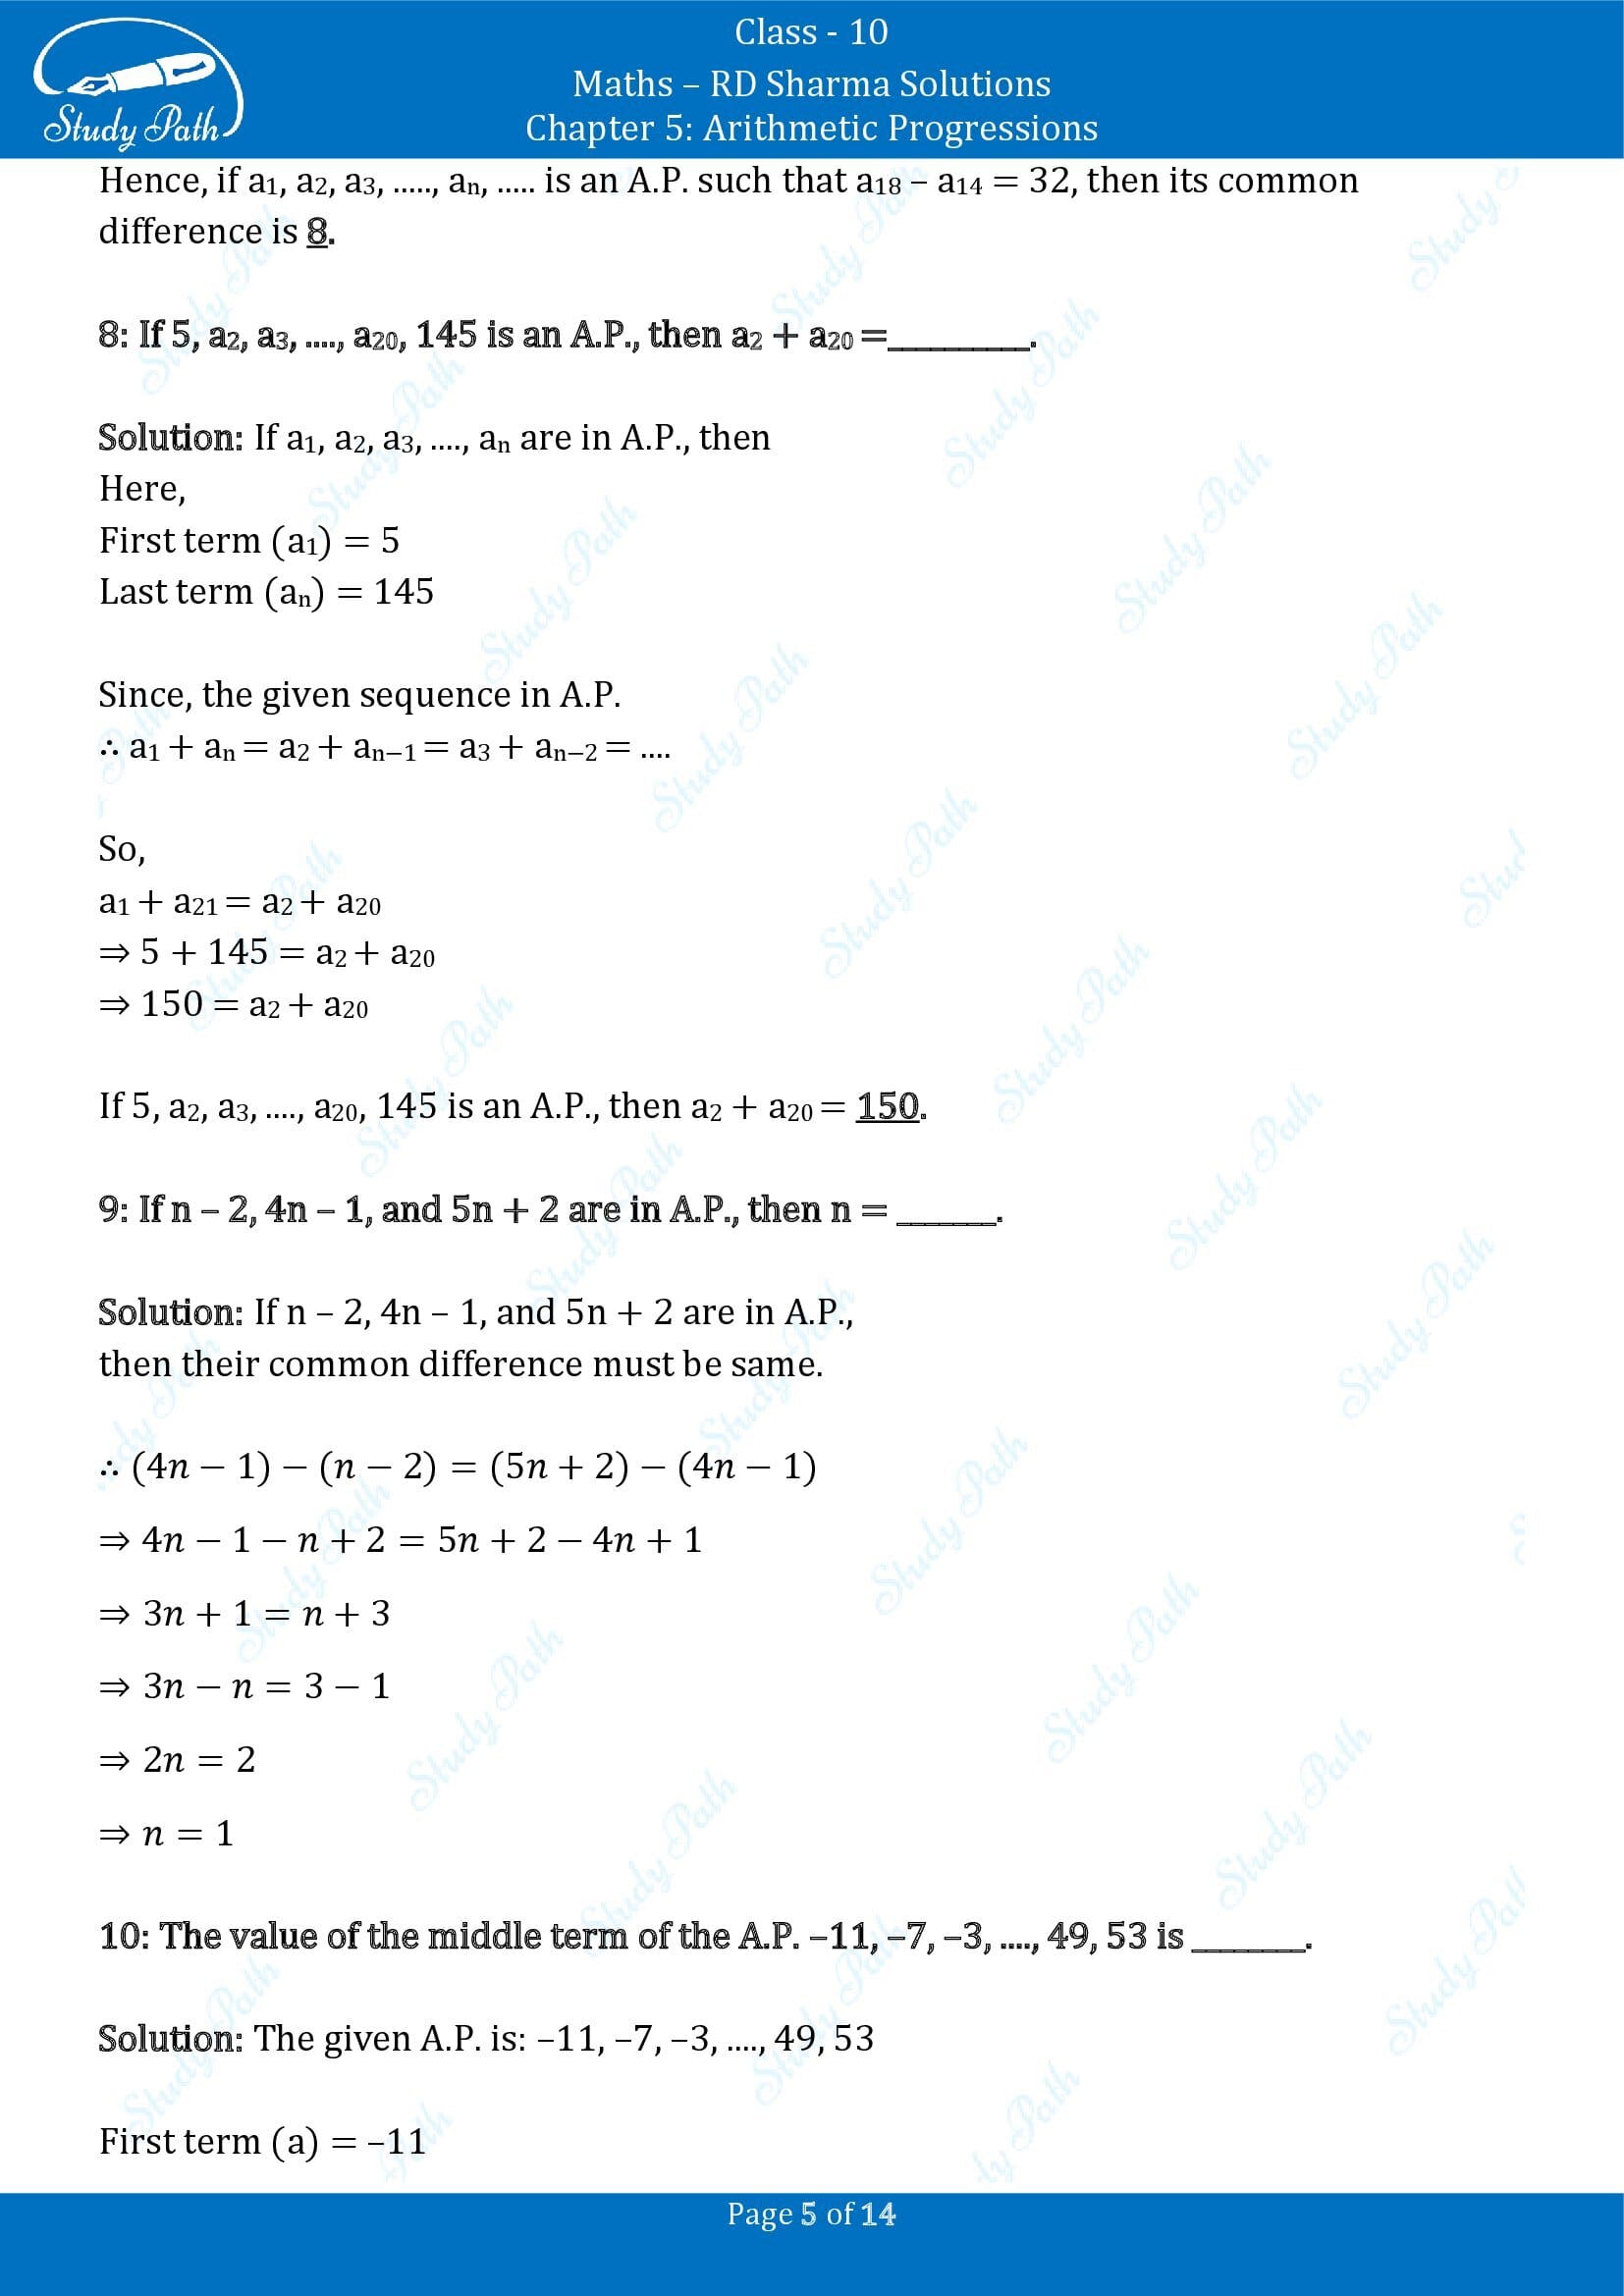 RD Sharma Solutions Class 10 Chapter 5 Arithmetic Progressions Fill in the Blank Type Questions FBQs 00005